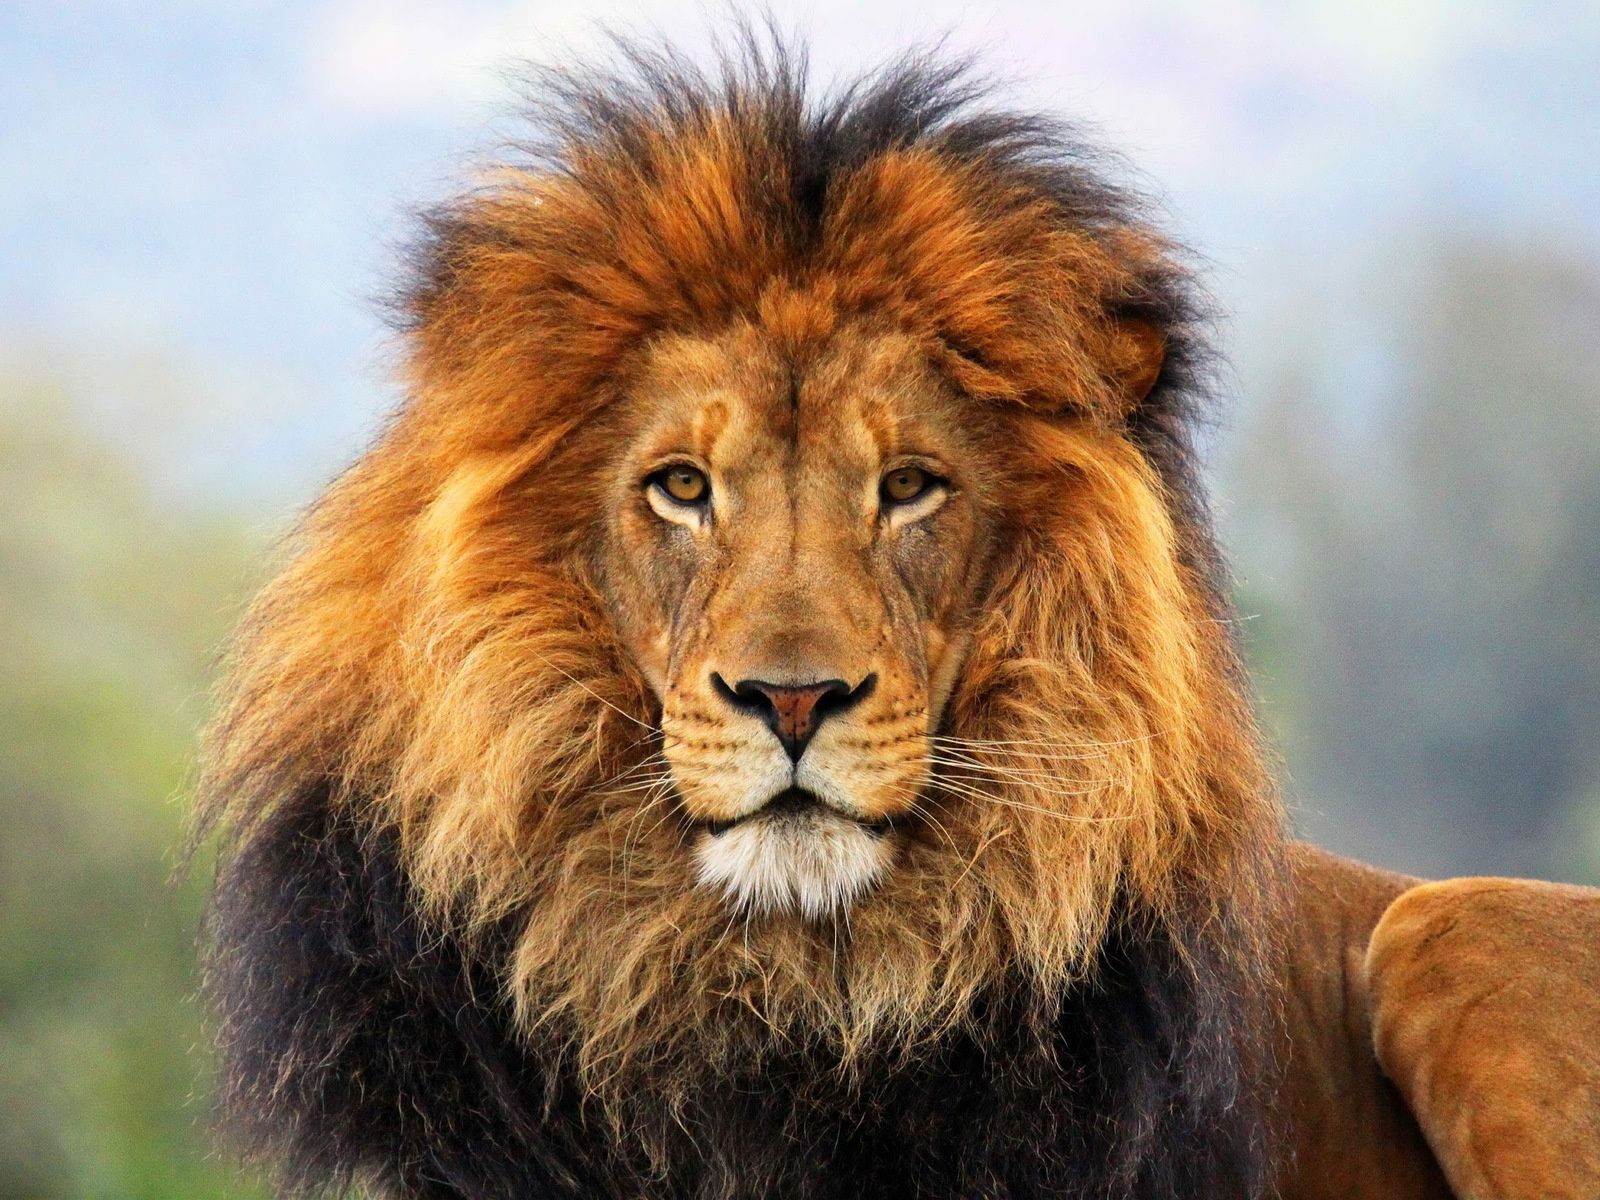 High Definition lion wallpaper for free download